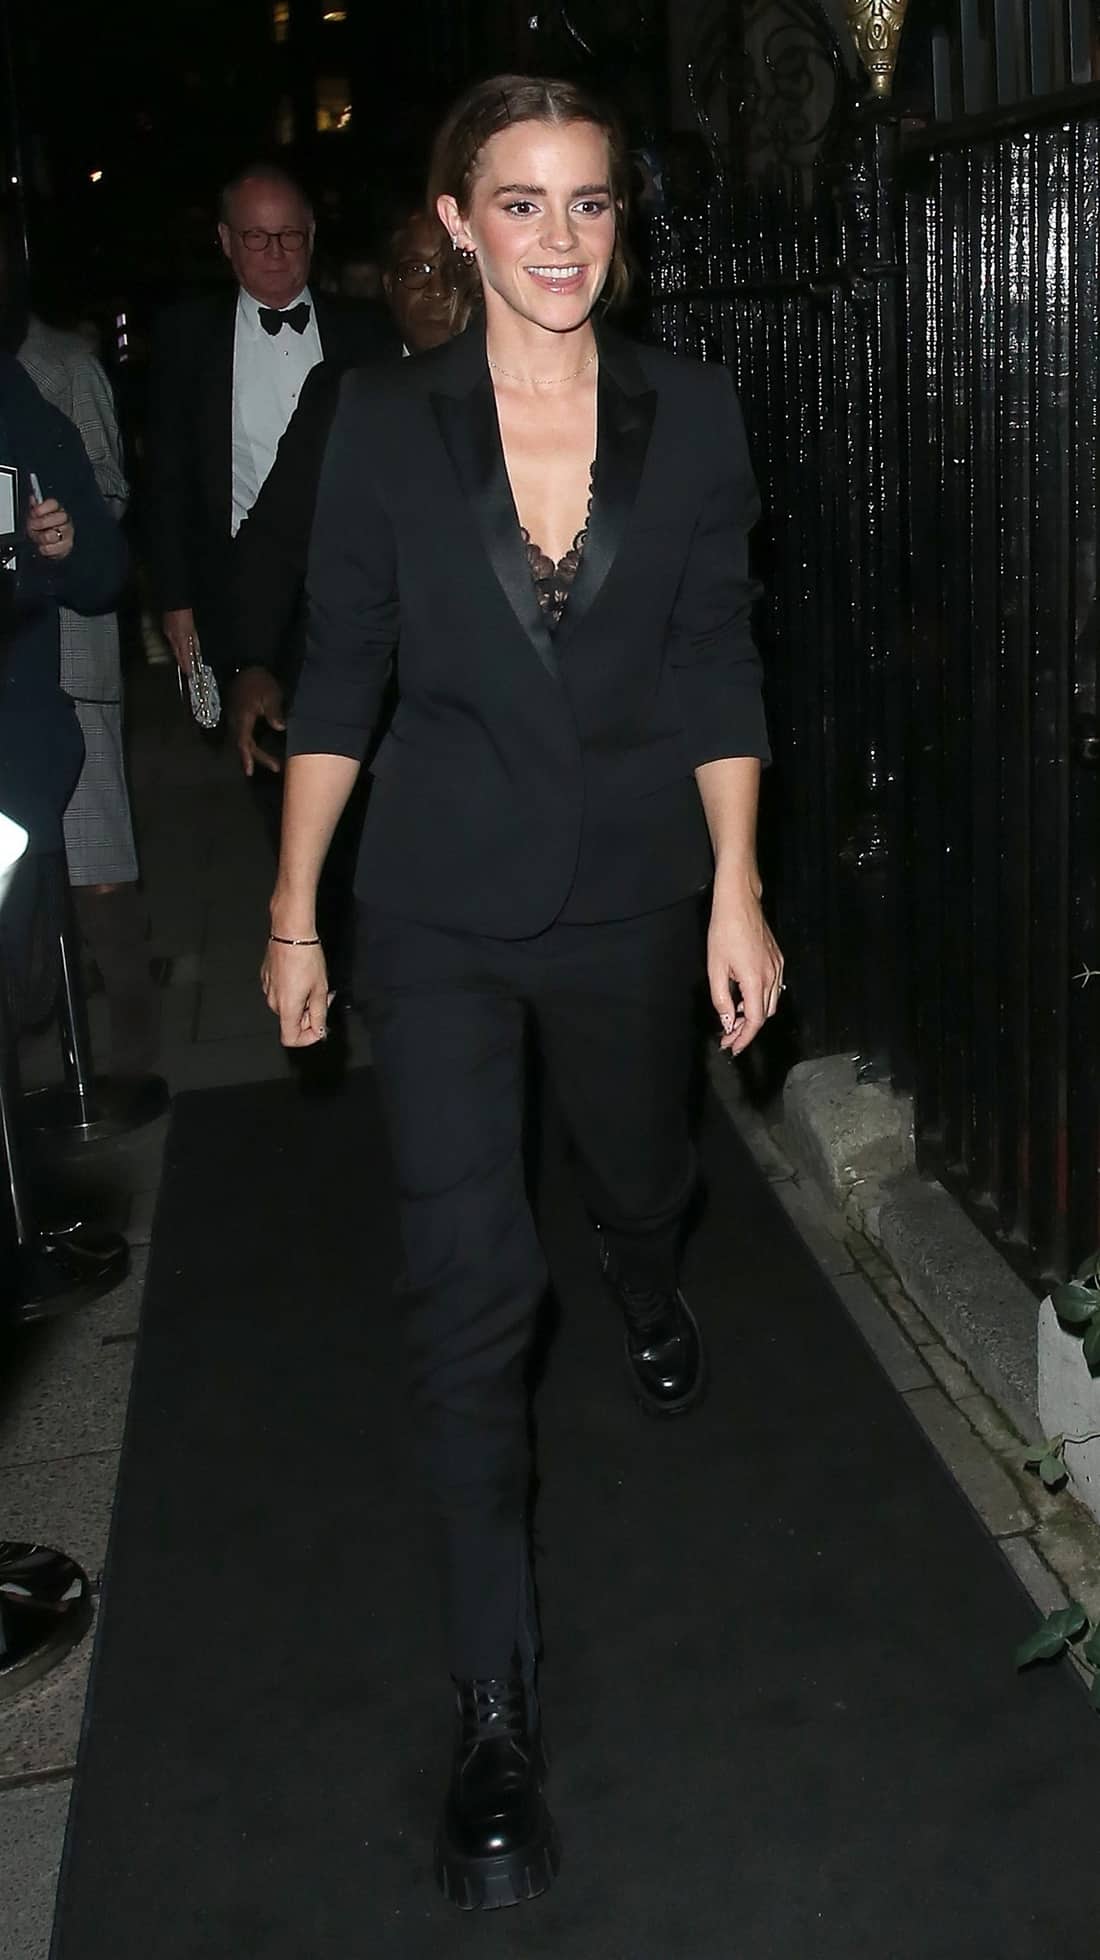 Emma Watson Dazzles in Pantsuit at British Vogue x Tiffany Party - 1